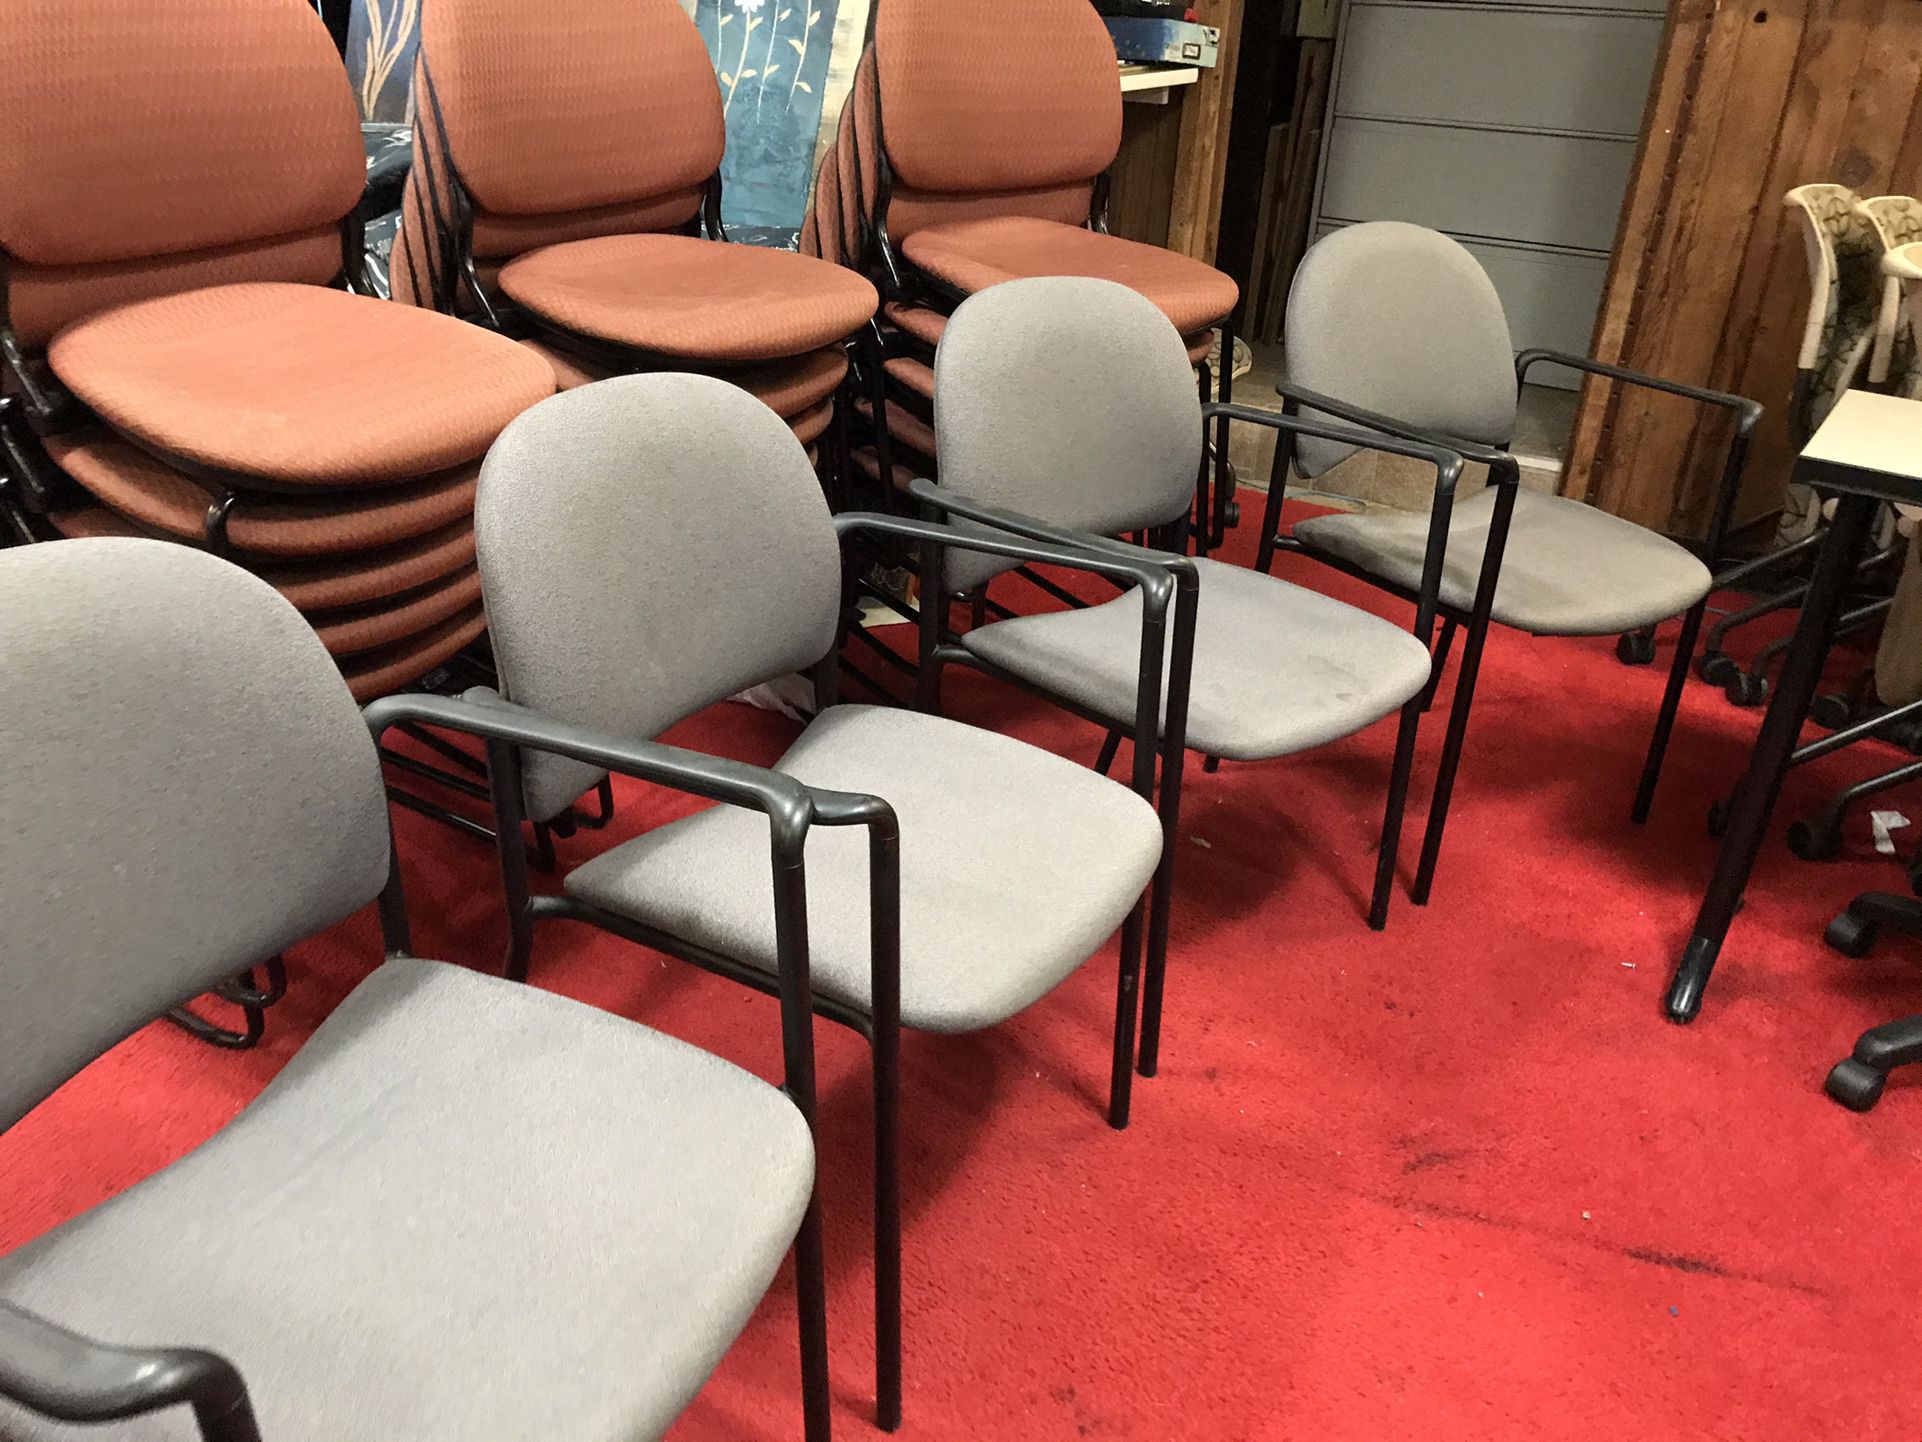 Chairs . Guest Chairs $25 Each. Reception Chair. Lobby chairs 4 For $100.